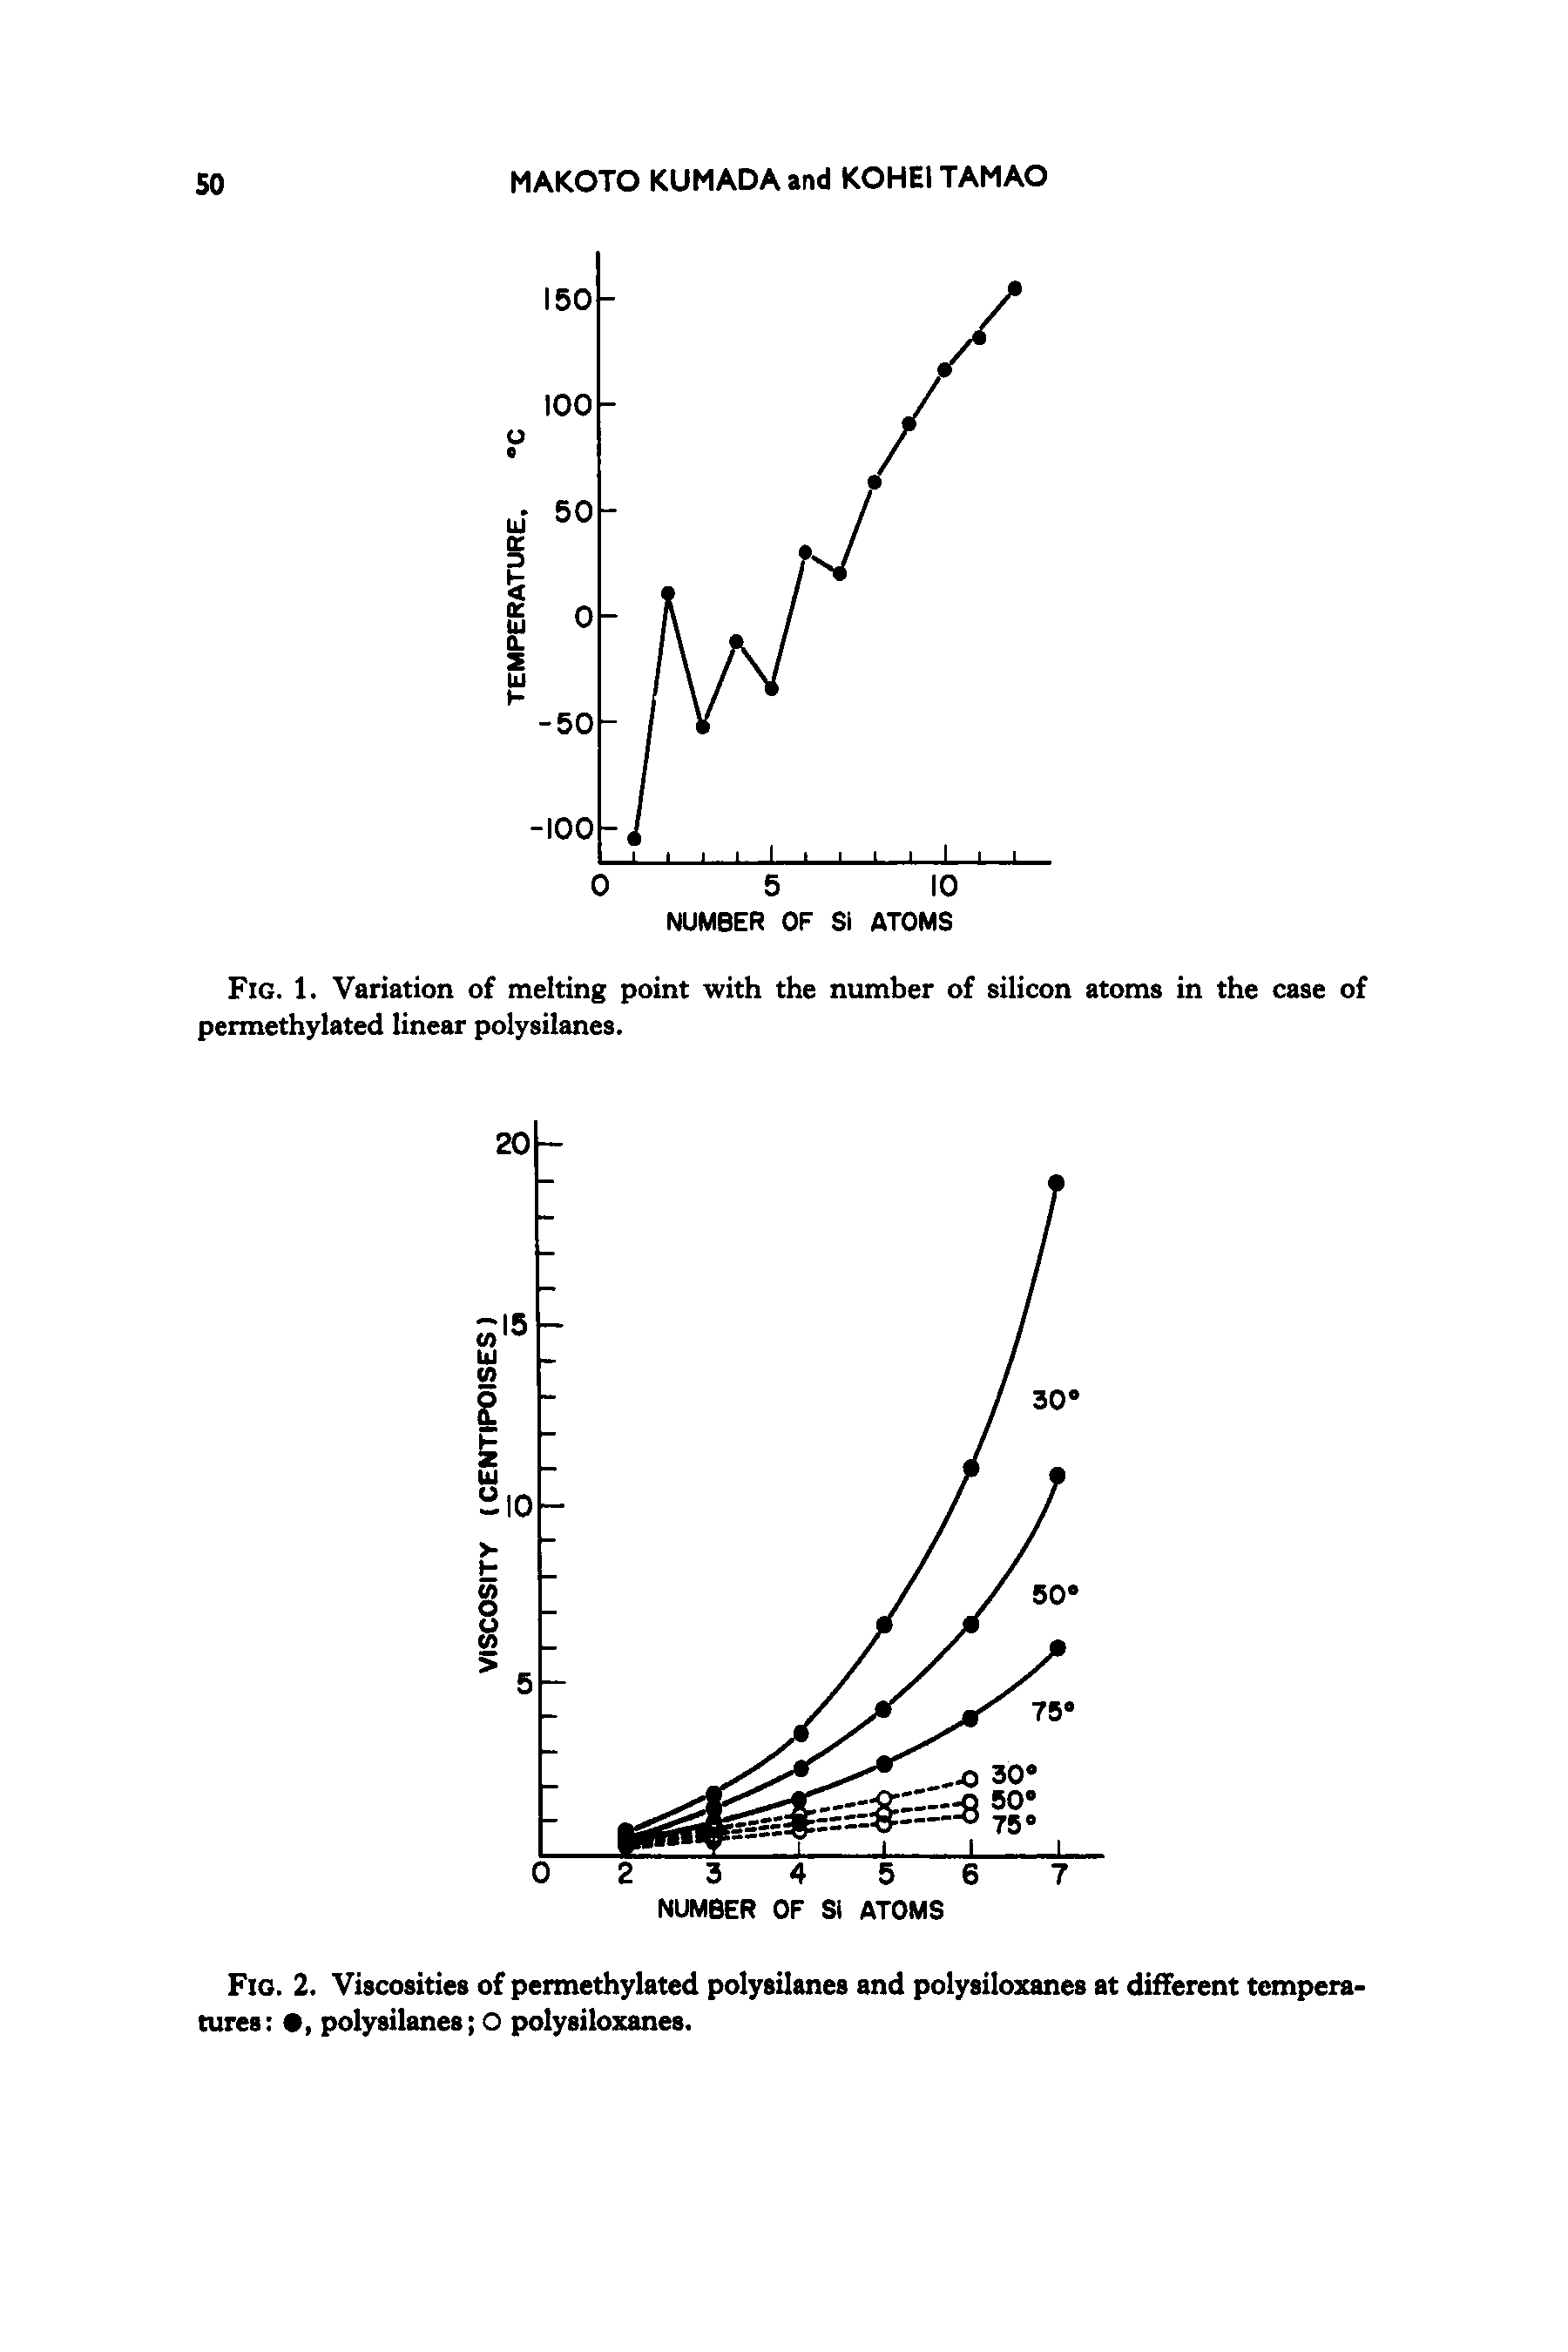 Fig. 1. Variation of melting point with the number of silicon atoms in the case of permethylated linear polysilanes.